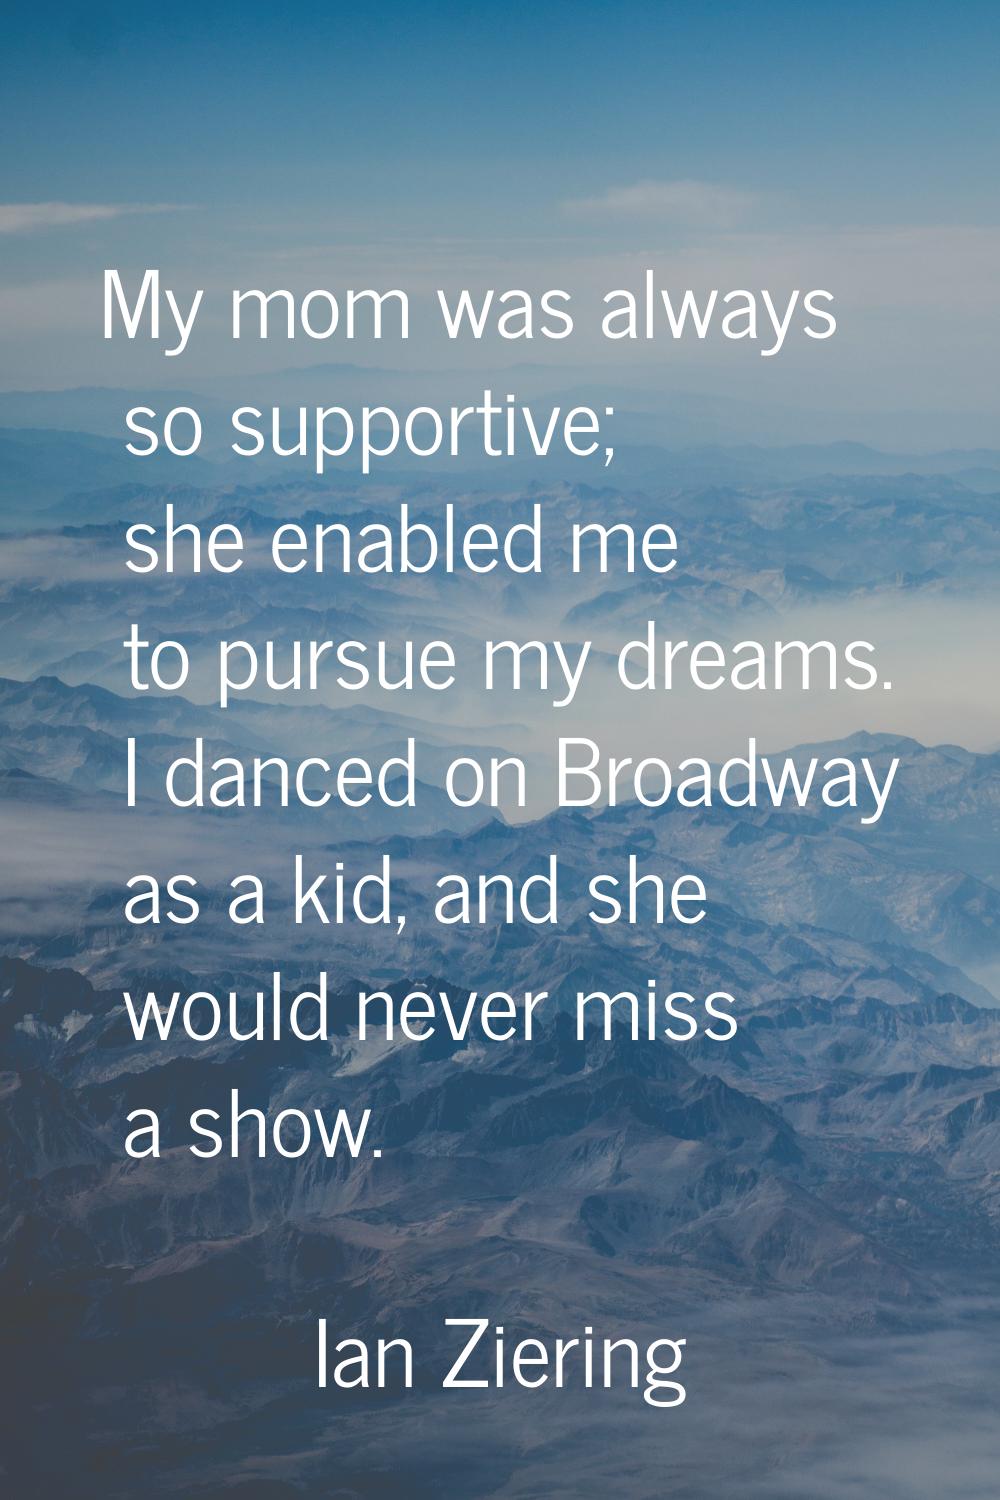 My mom was always so supportive; she enabled me to pursue my dreams. I danced on Broadway as a kid,